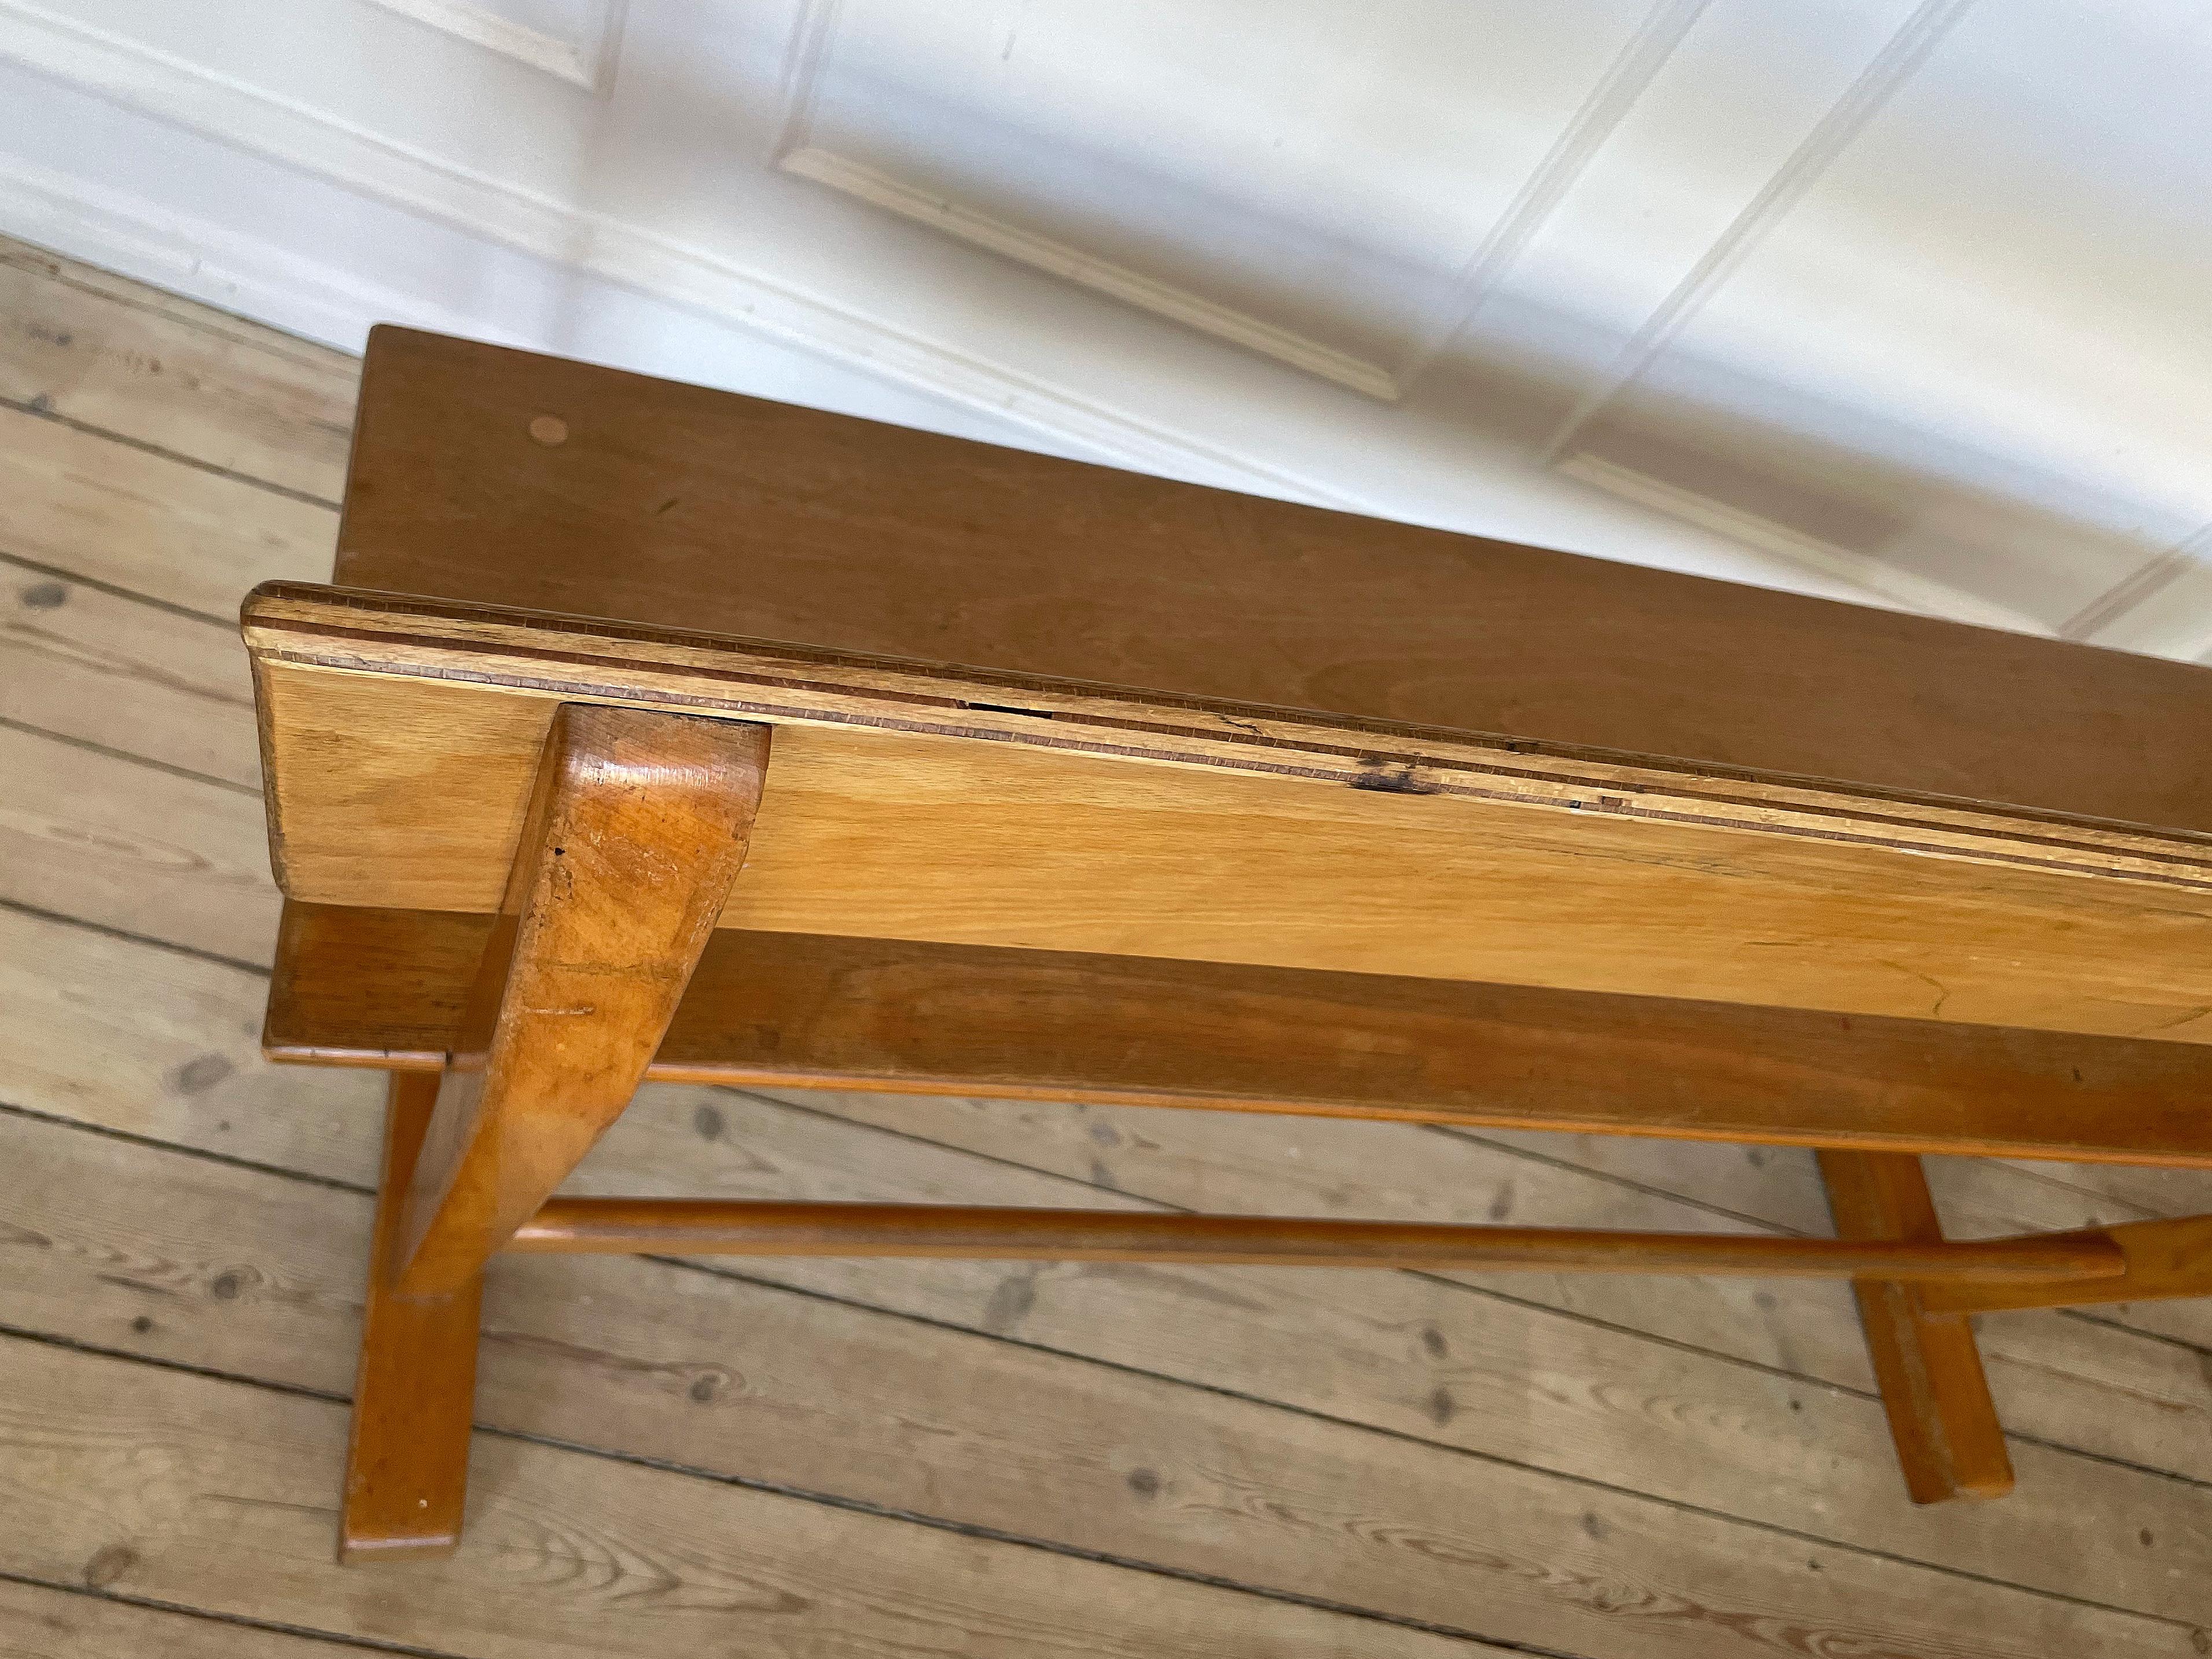 Danish Modern Hand-Crafted Wooden Bench, 1950s For Sale 13